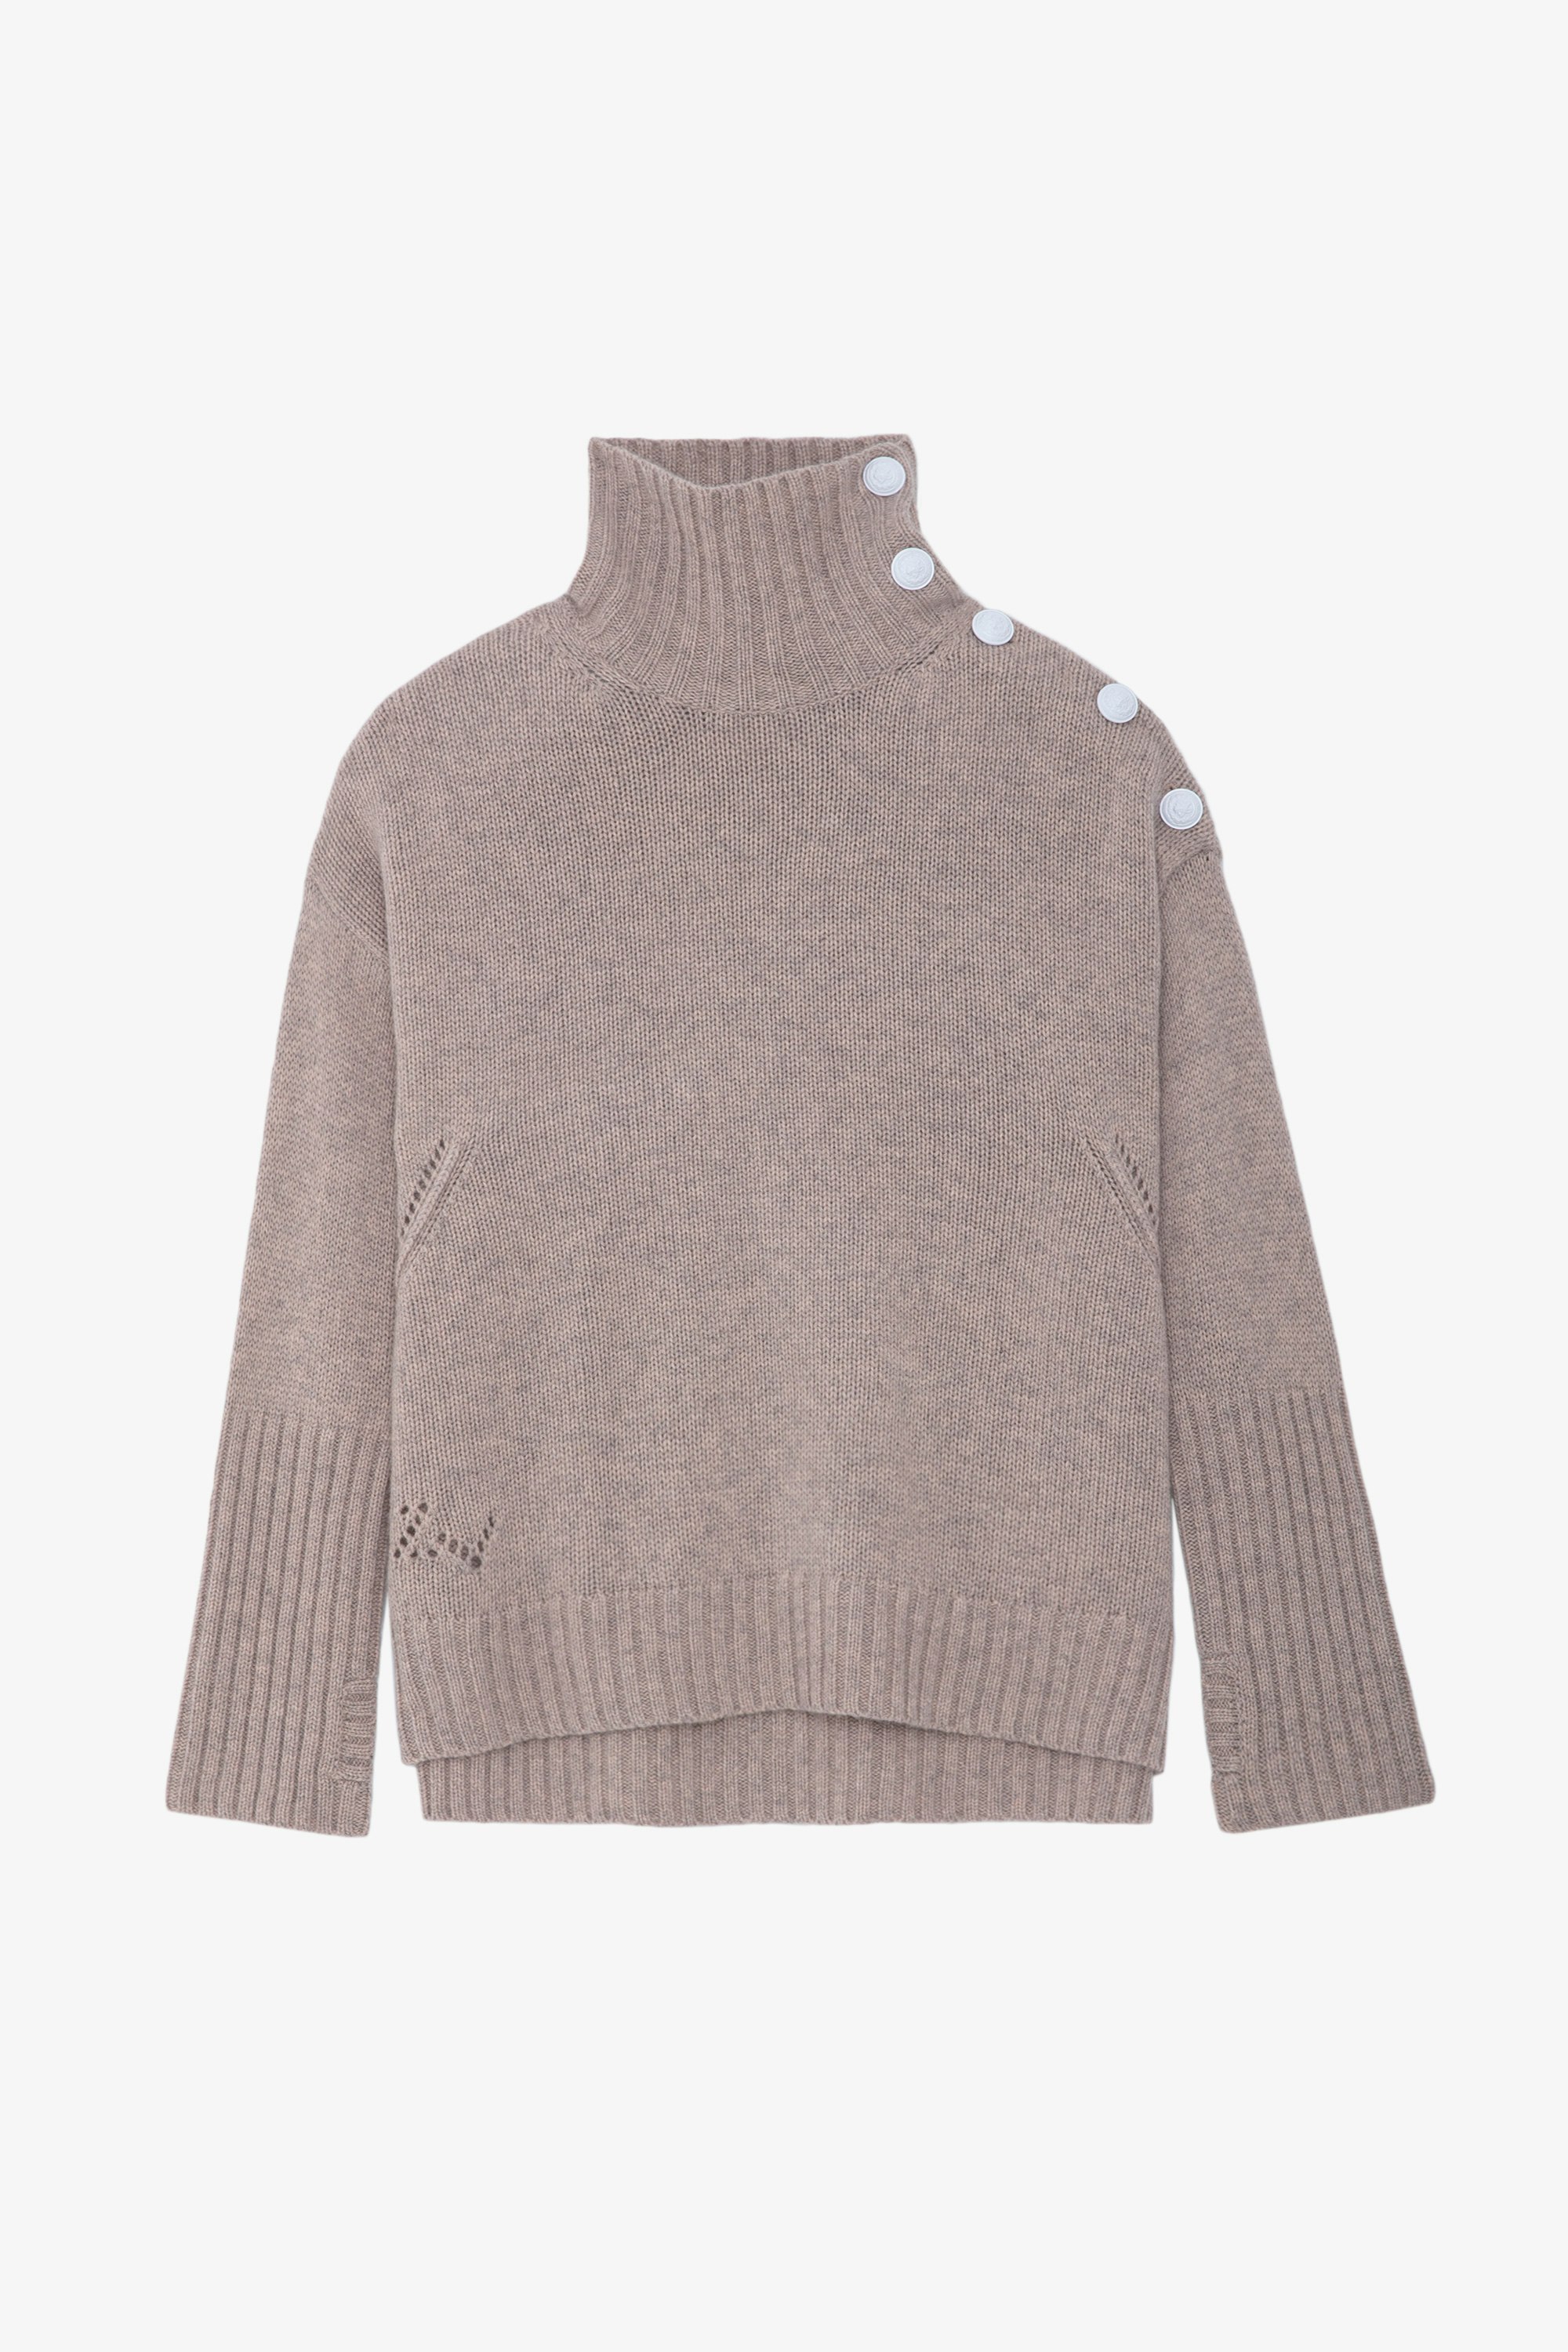 Alma Cashmere Sweater - Pale pink cashmere mock-neck sweater with long sleeves and buttons on the shoulder.